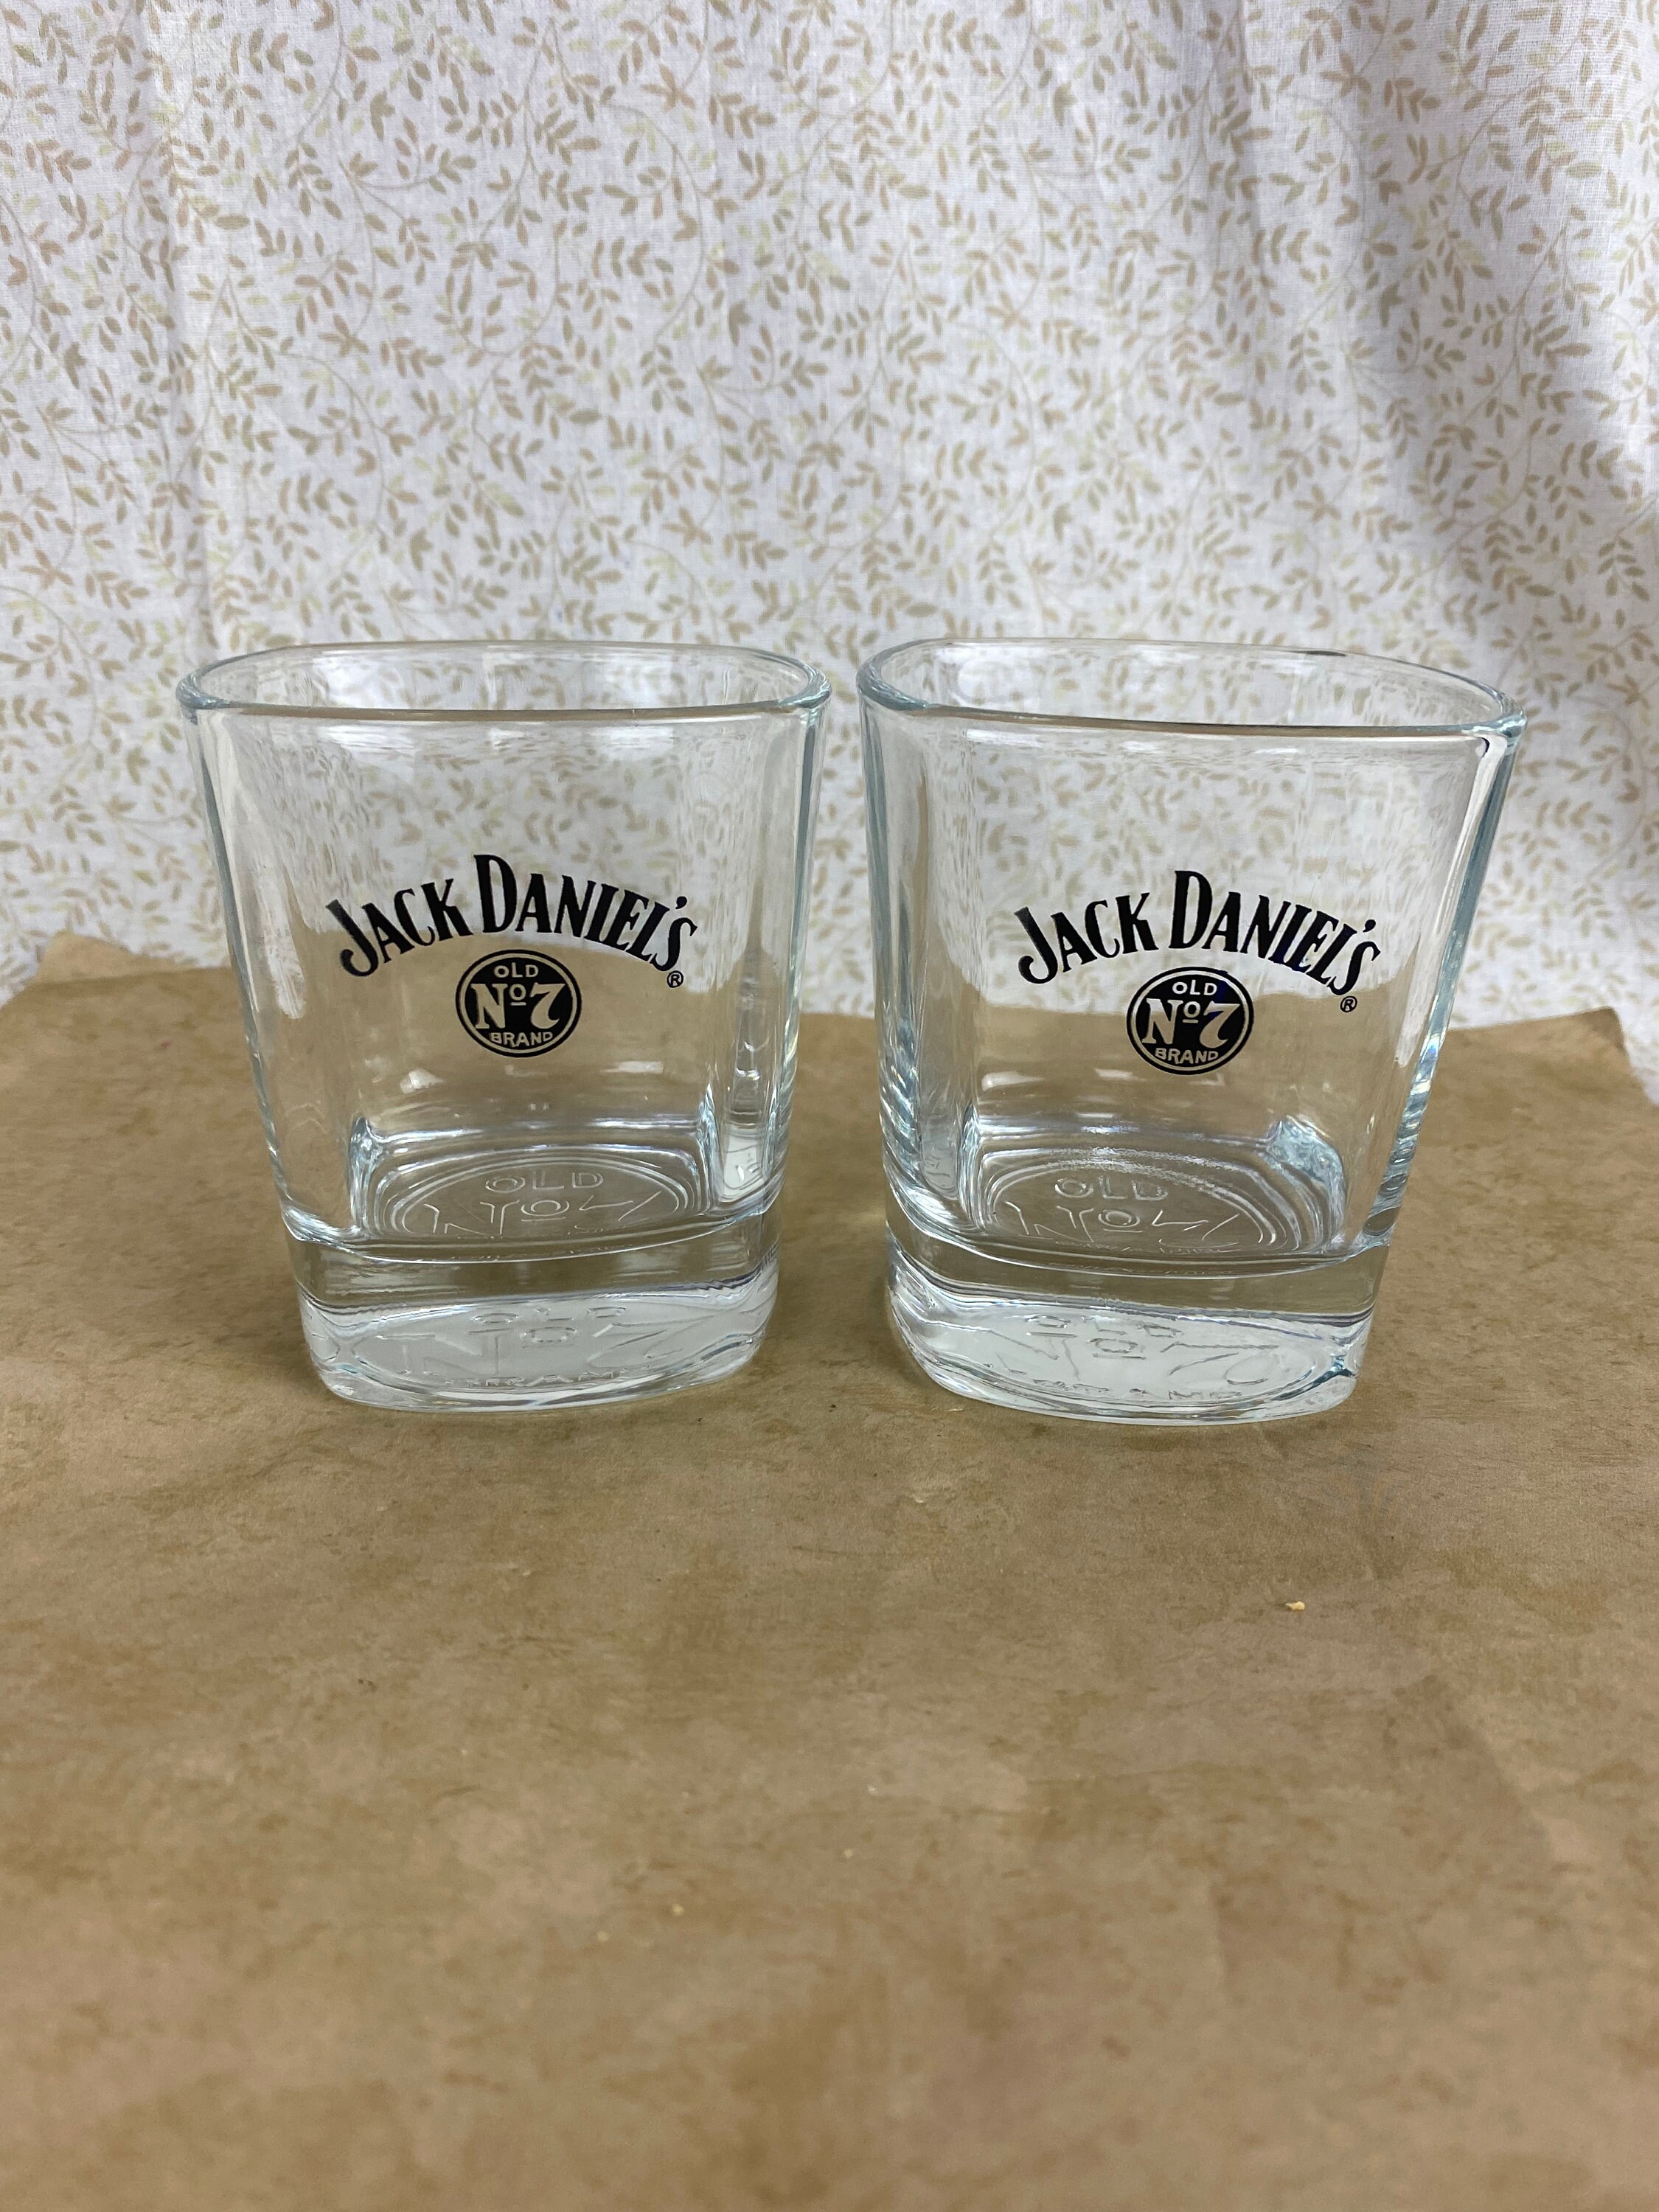 7 Highball Glasses Tennessee Whiskey Silver Rim Tumblers 5 Jack Daniels Old No 